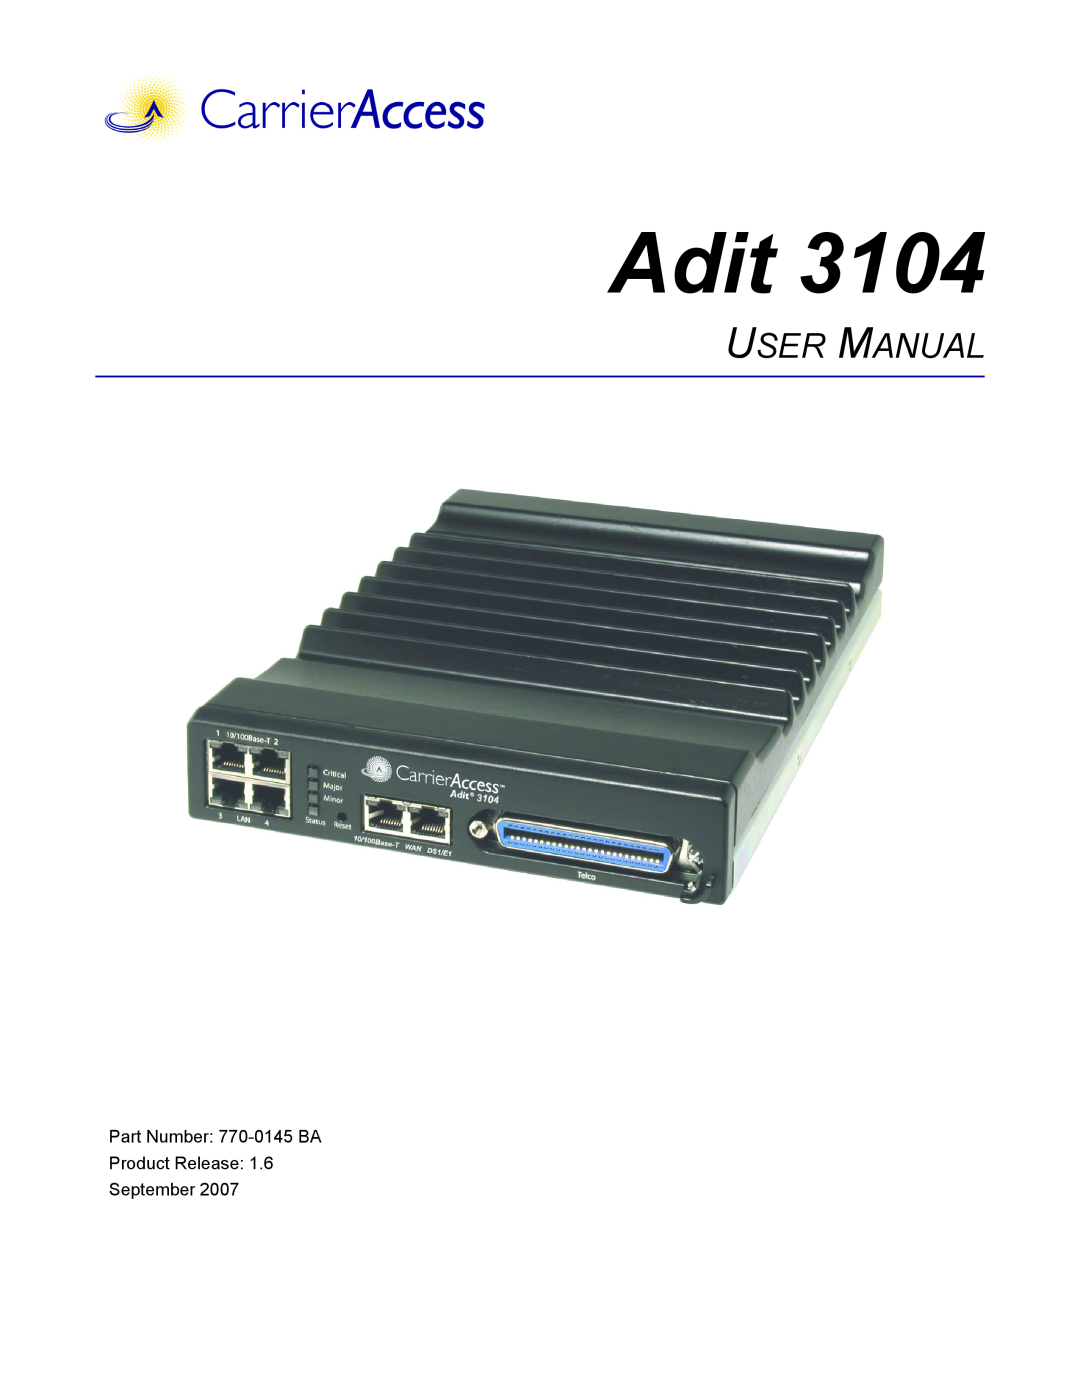 Carrier Access Adit 3104 user manual User Manual, Part Number 770-0145 BA Product Release September 